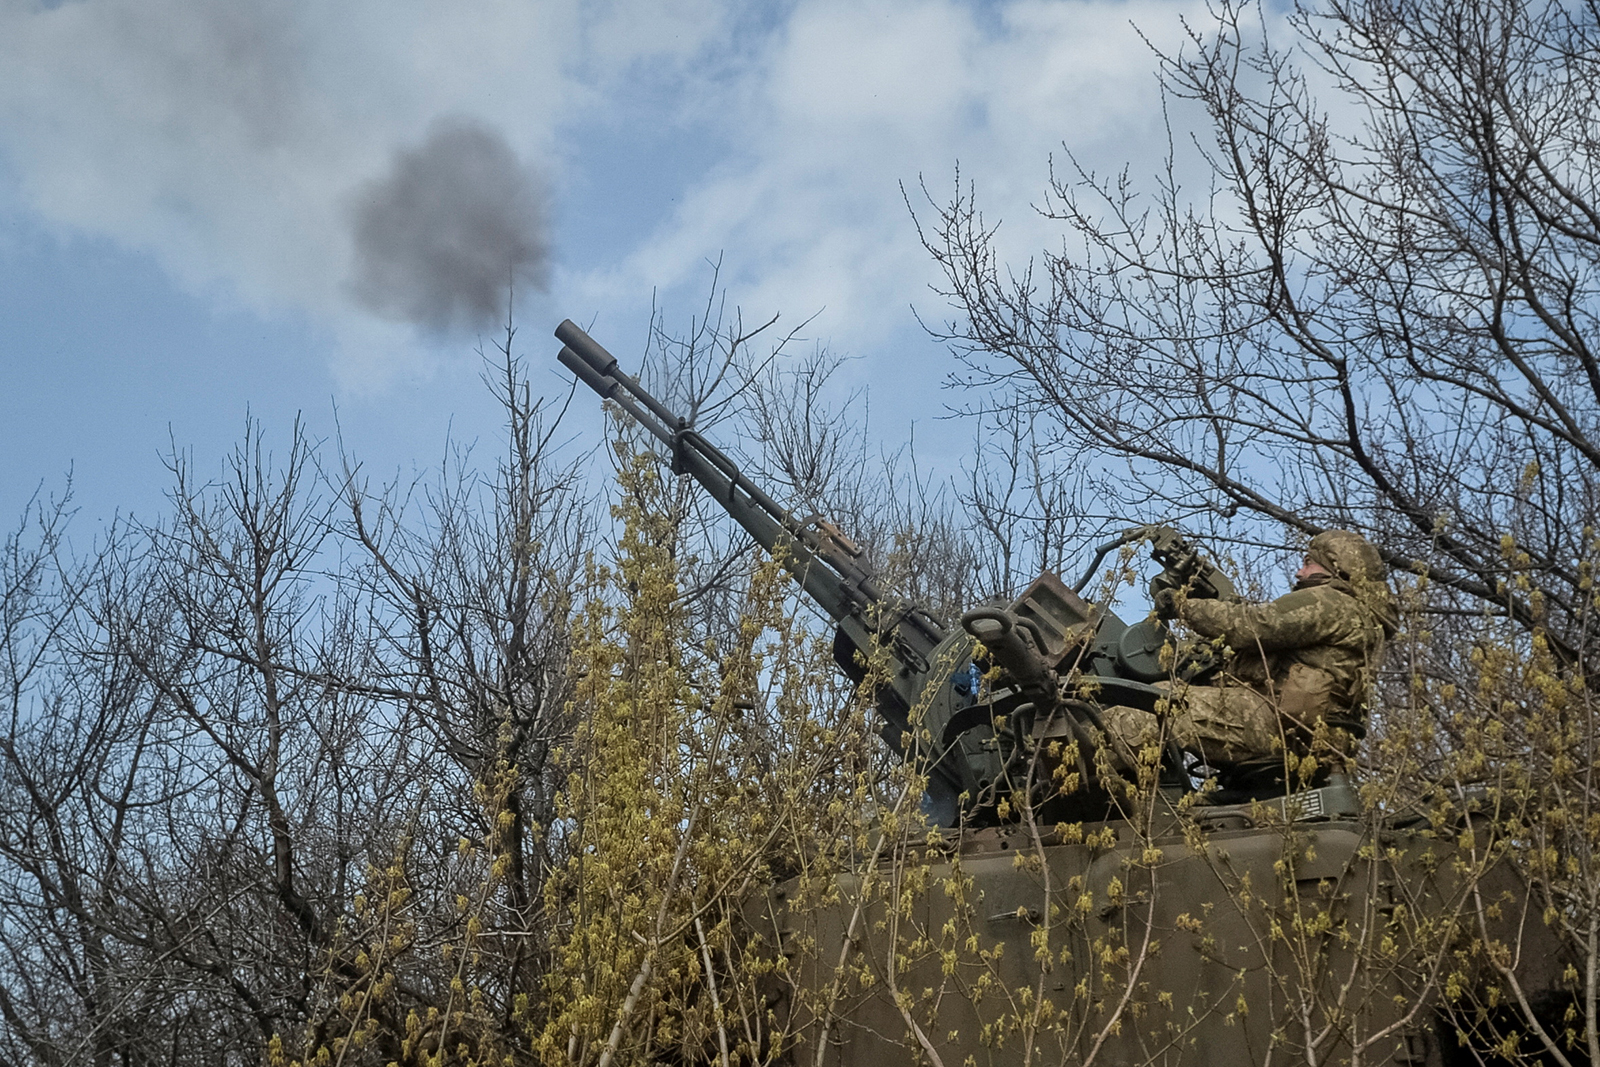 Ukrainian servicemen fire a military vehicle with anti-aircraft cannon near the front line city of Bakhmut, Ukraine on April 7.